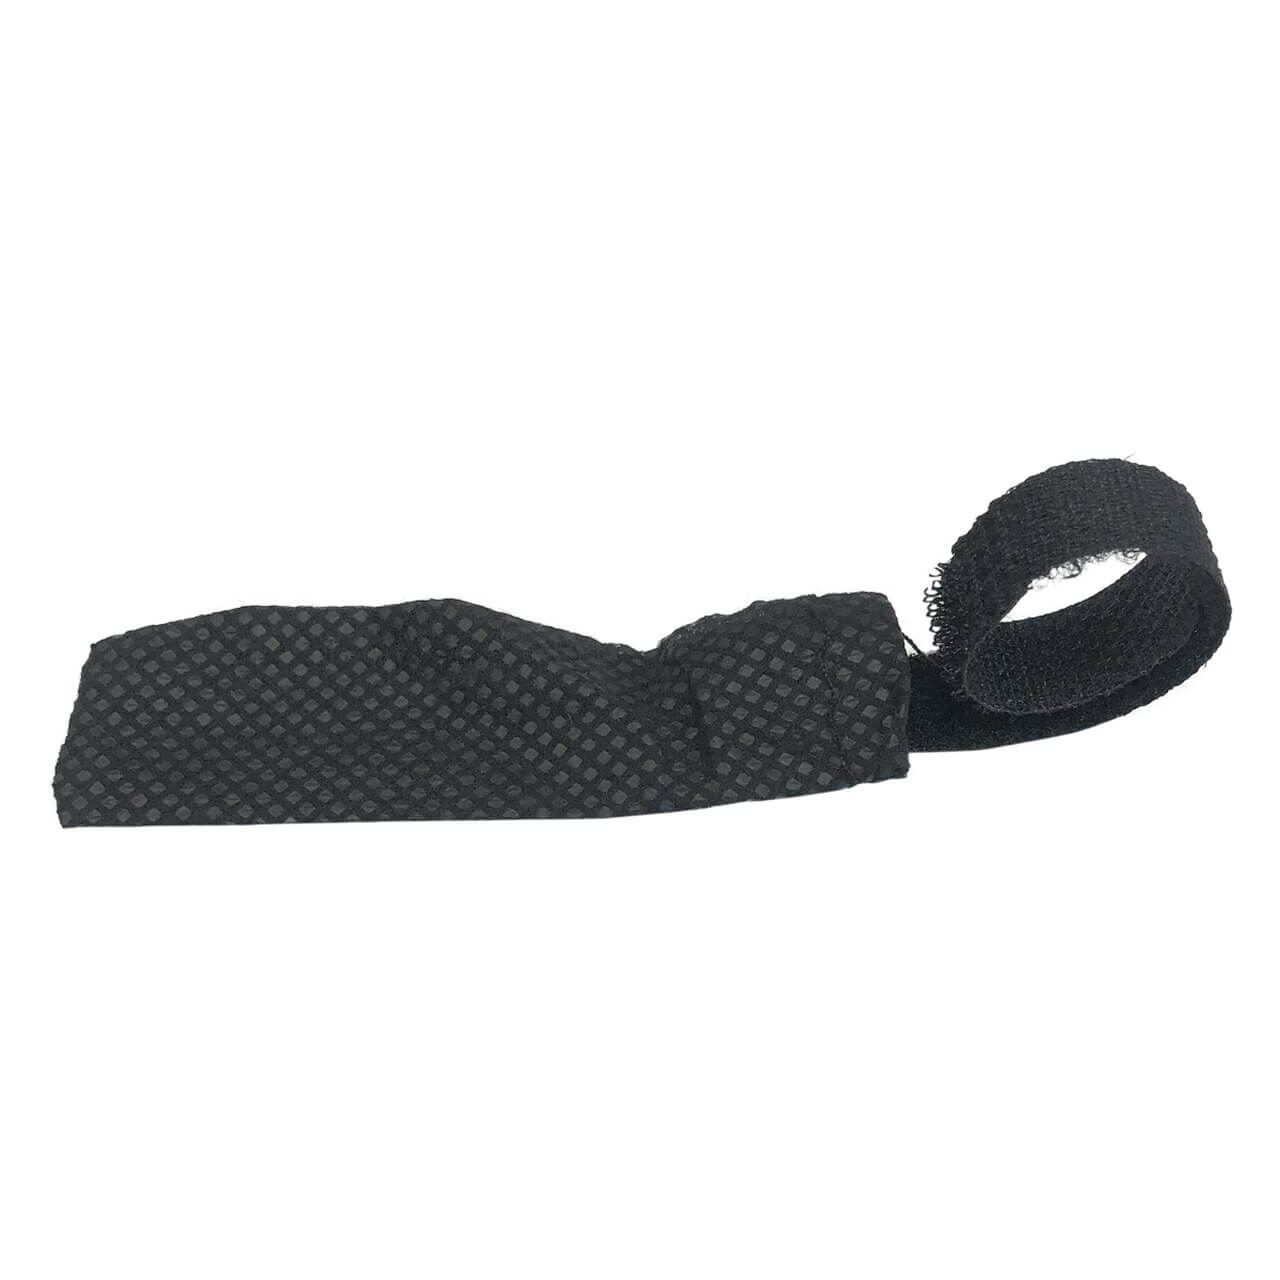 Hygenx™ Gooseneck Mic Covers with Velcro Strap - 100 pieces (PRE-ORDER NOW) - Learning Headphones